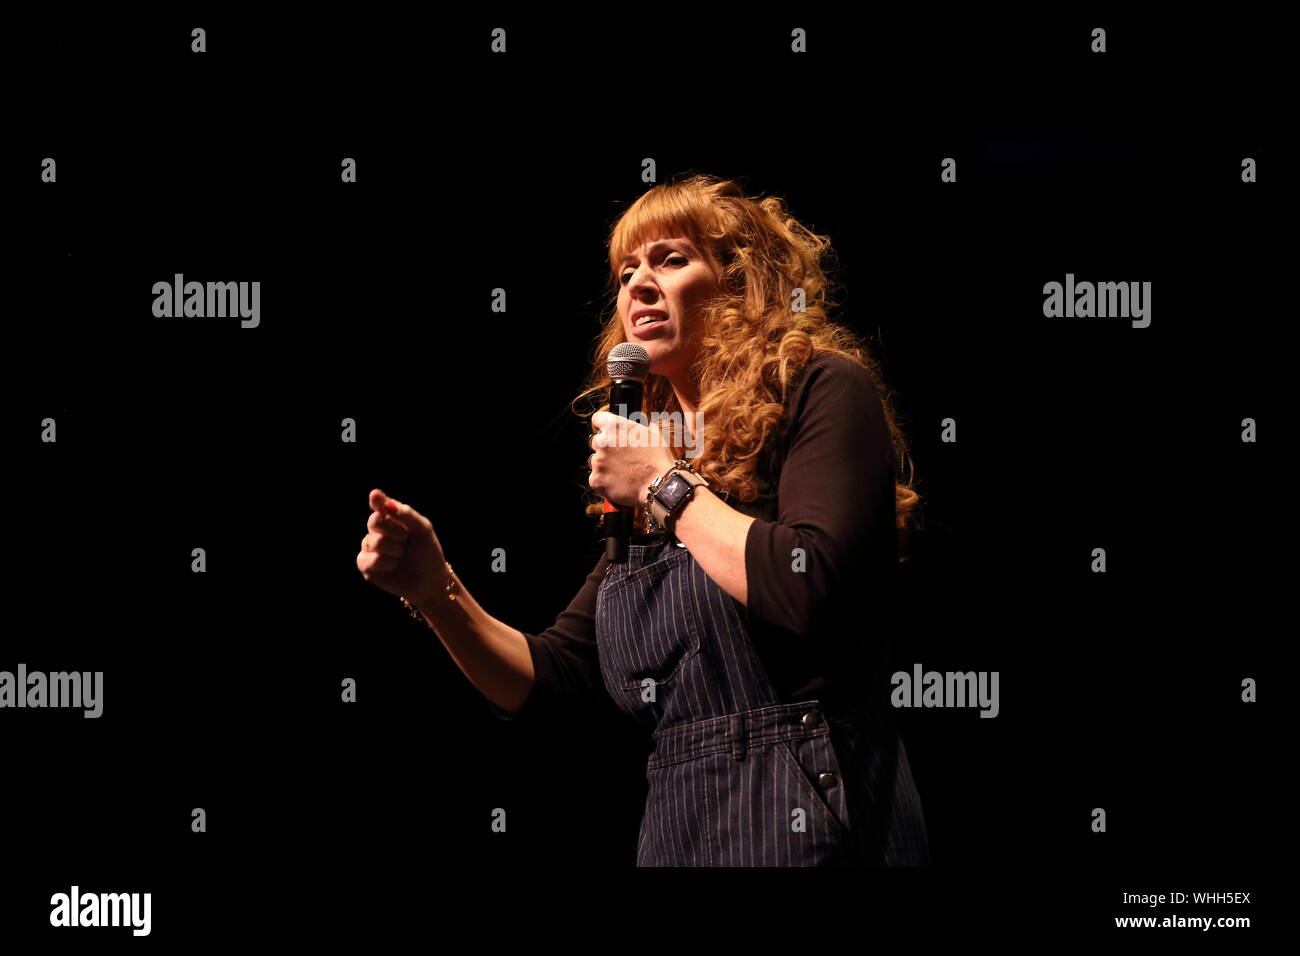 Salford, Greater Manchester, UK. 2nd September, 2019. The Labour Party shadow Education Secretary Angela Rayner MP addresses the crowd at a rally at The Lowry Theatre in Salford. Stock Photo